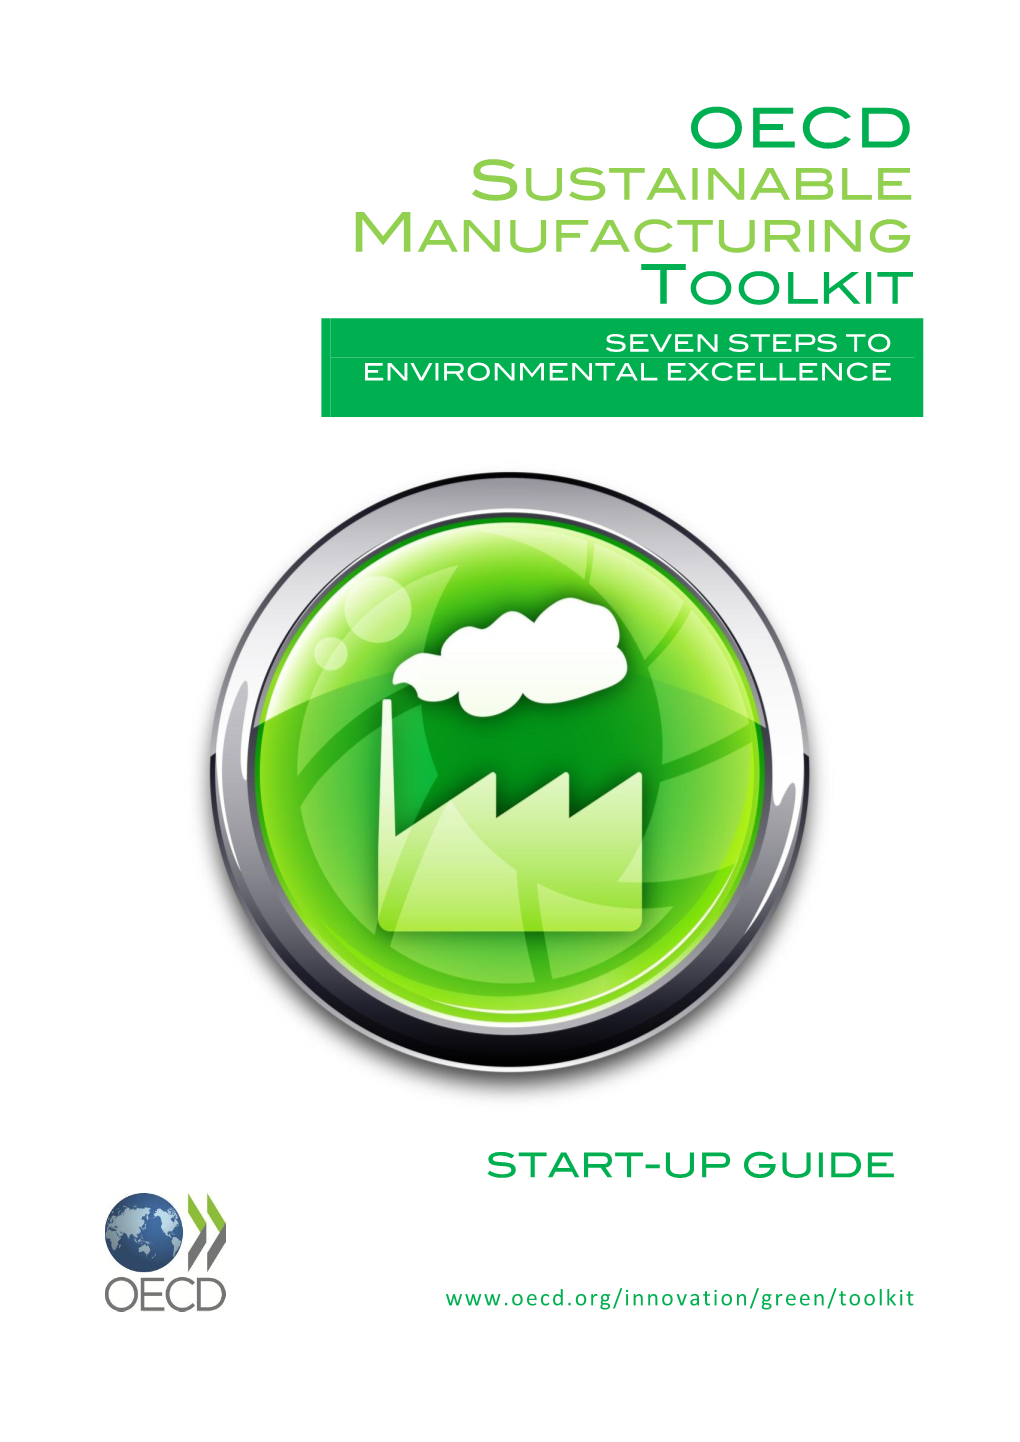 The OECD Sustainable Manufacturing Toolkit